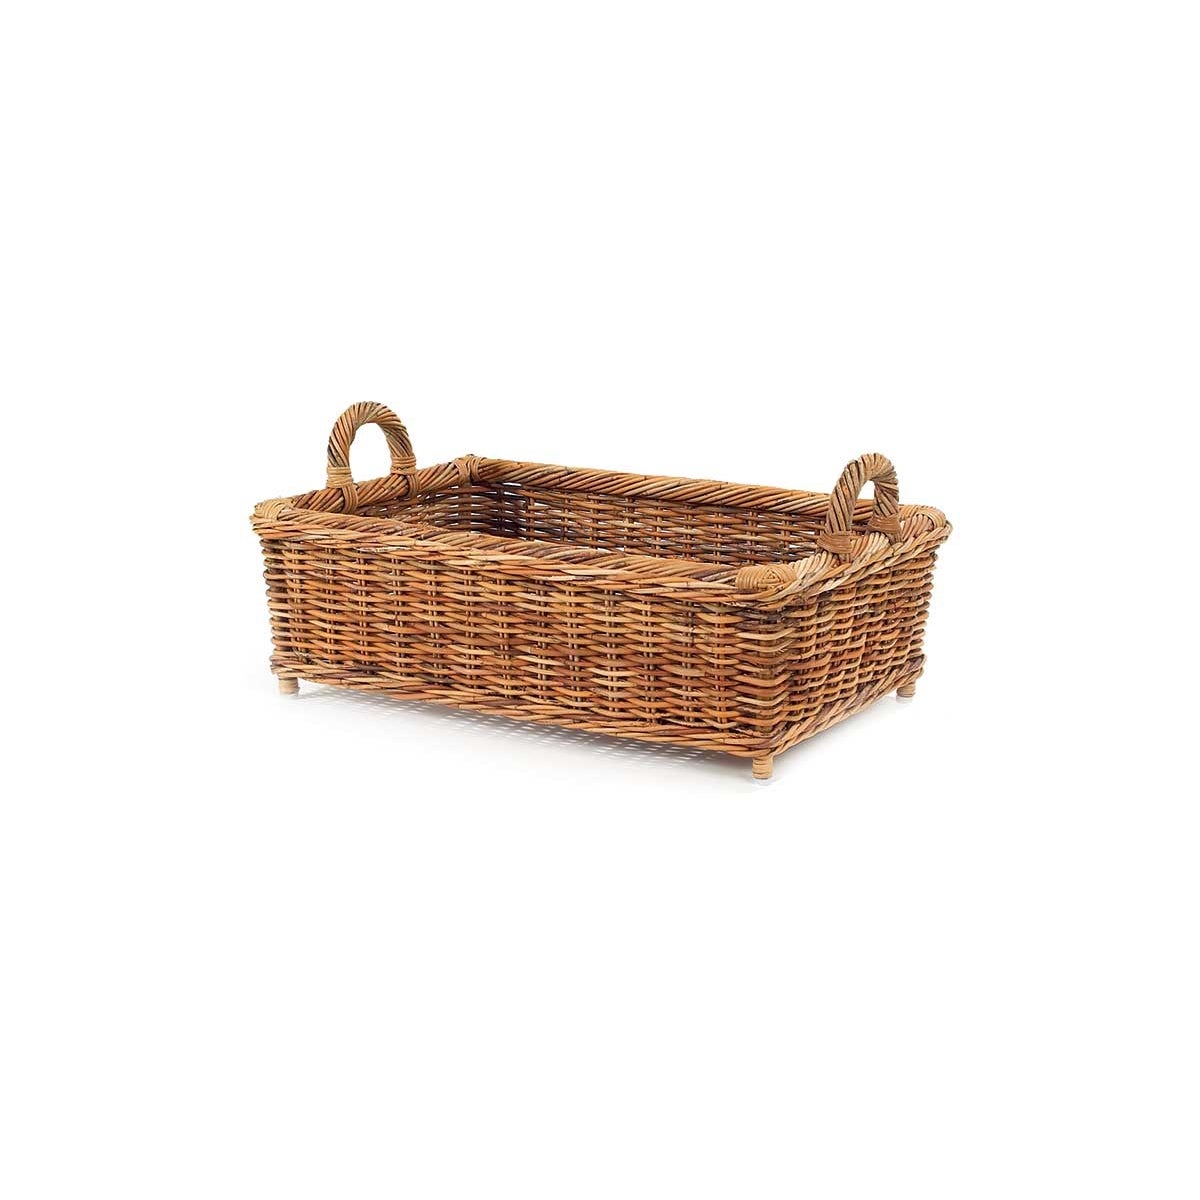 French Country Loft Basket